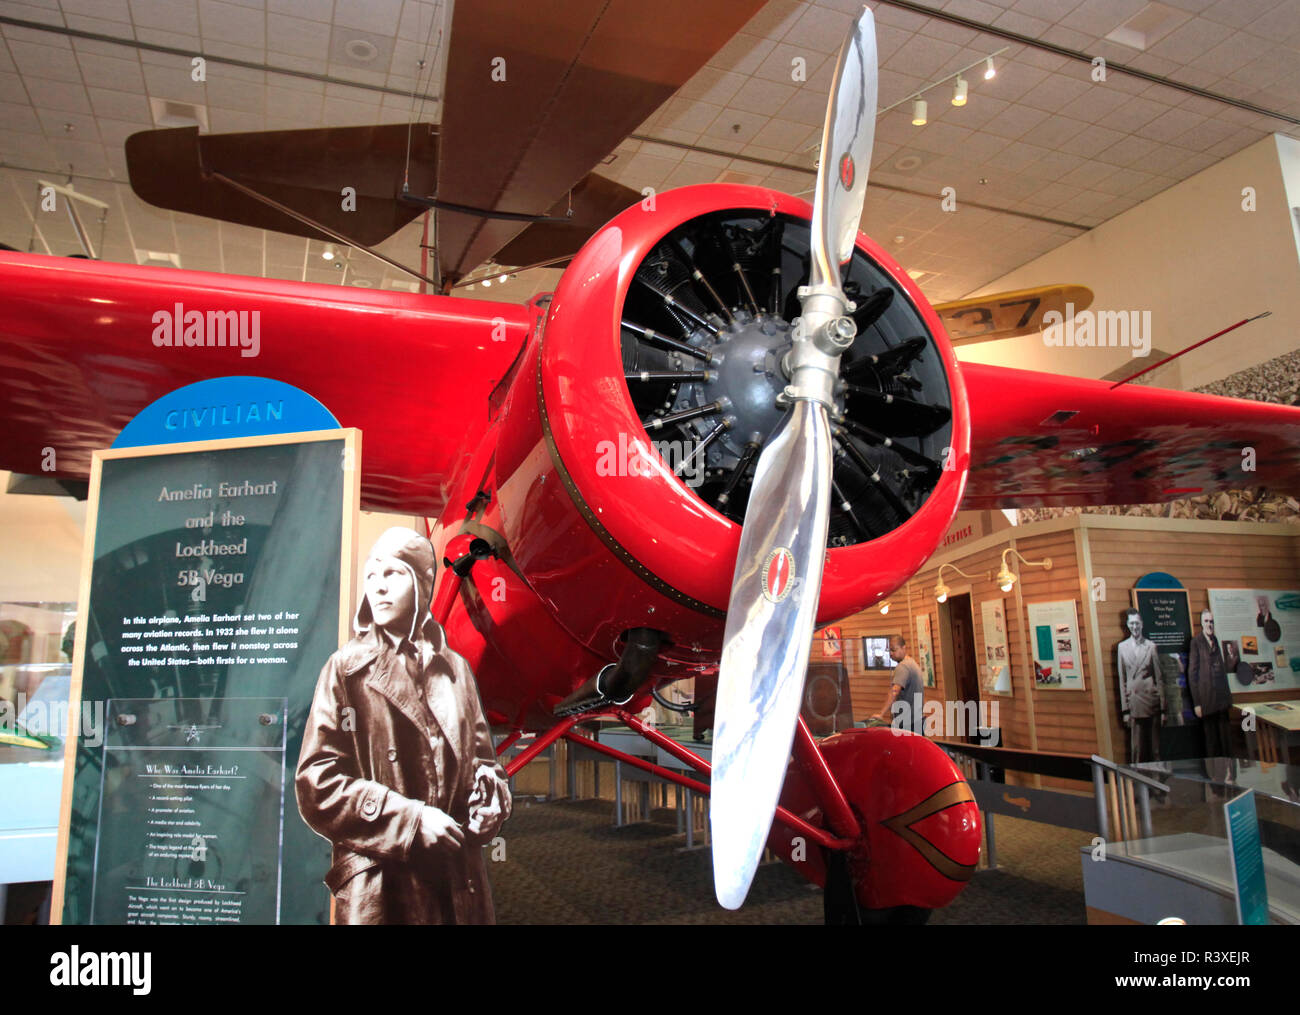 Amelia Earhart's Lockheed 5B Vega at the Smithsonian Air and Space Museum. Stock Photo